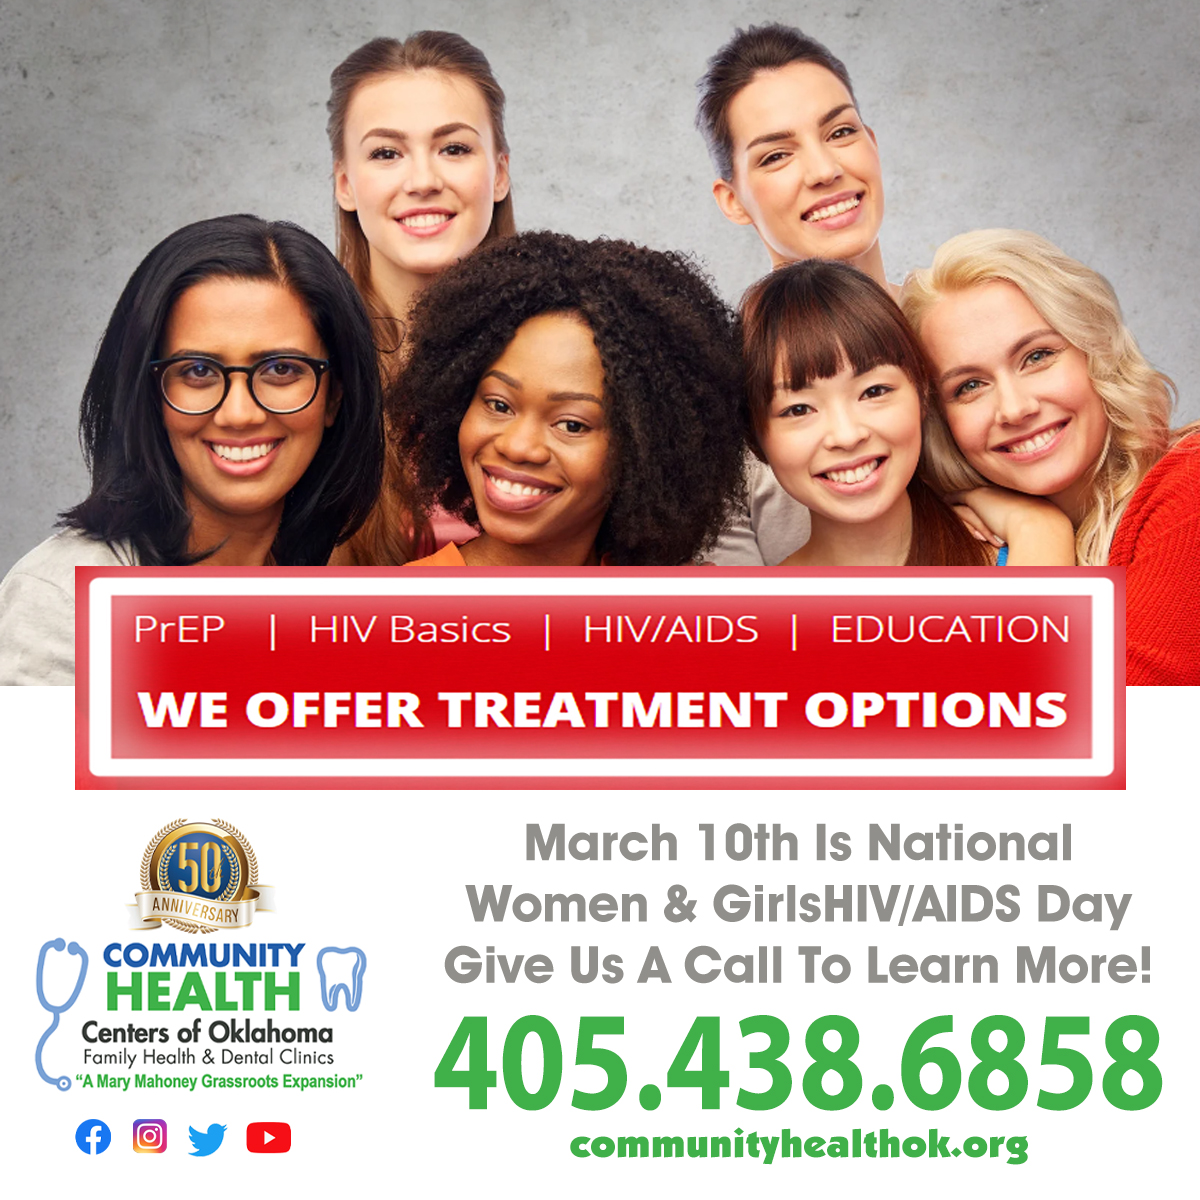 Today is National Women and Girls HIV/AIDS Awareness Day.
Help reduce HIV stigma and promote testing, prevention, and treatment.
Have questions? Call us at 405.438.6858
#HIV/AIDSPREVENTION #HIV/AIDSEDUCATION #HIV/AIDS #HIV/AIDSTREATMENT